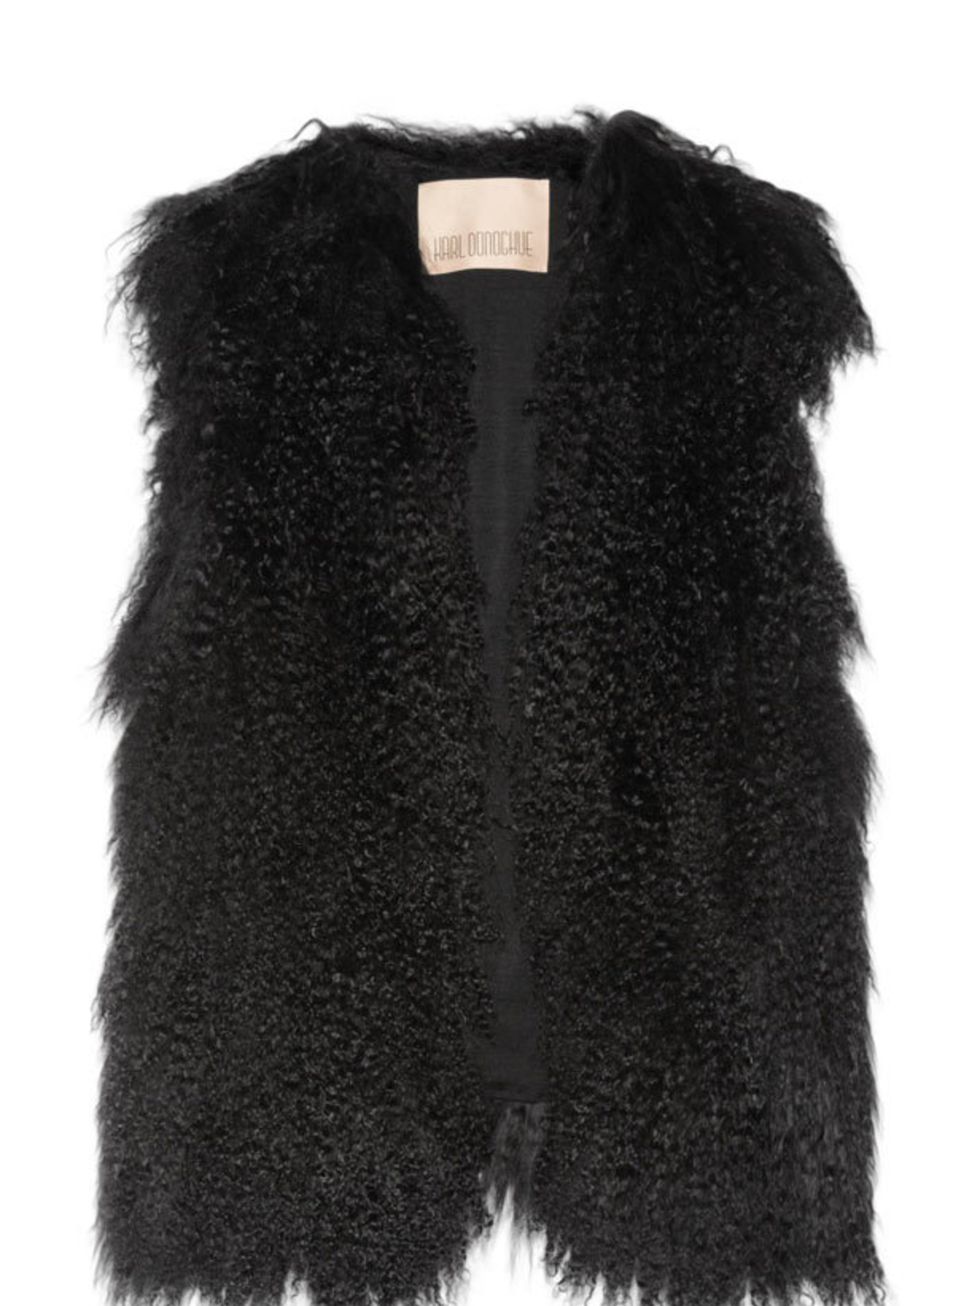 <p>Karl Donoghue shearling gilet, £460, at <a href="http://www.net-a-porter.com/product/170933">Net-a-Porter</a></p>